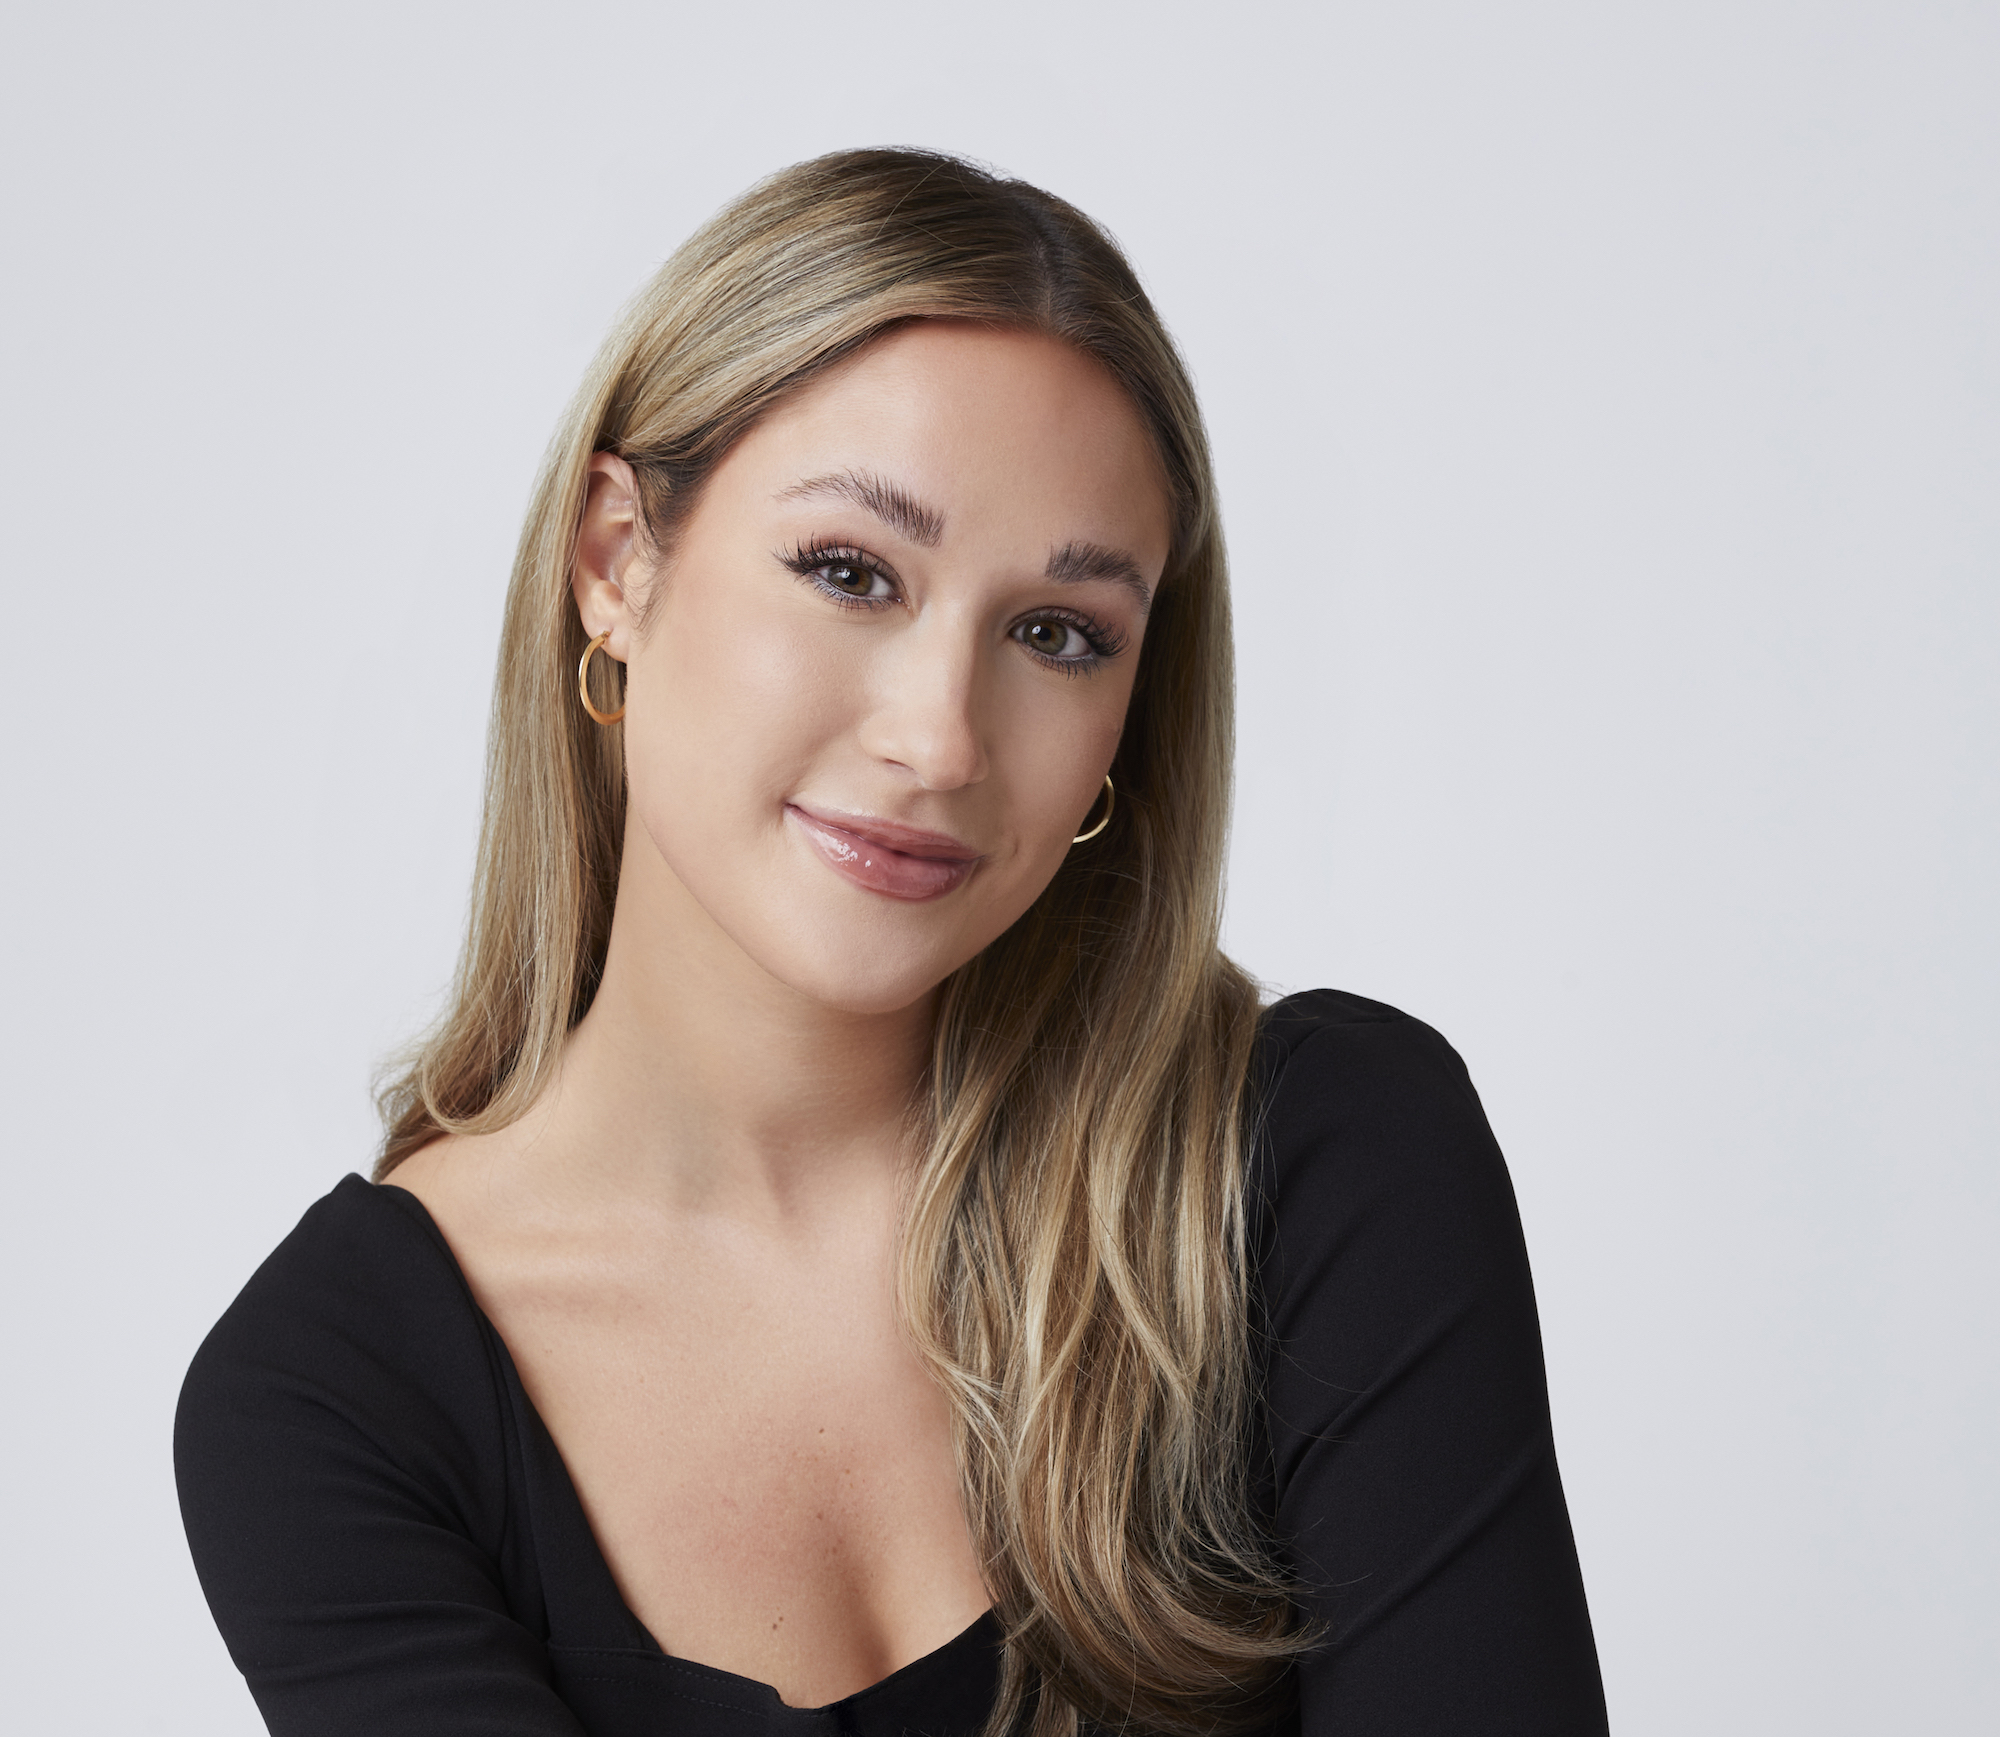 'The Bachelor' 2022 contestant Rachel Recchia wearing a long sleeved black shirt in a promotional image for the show.